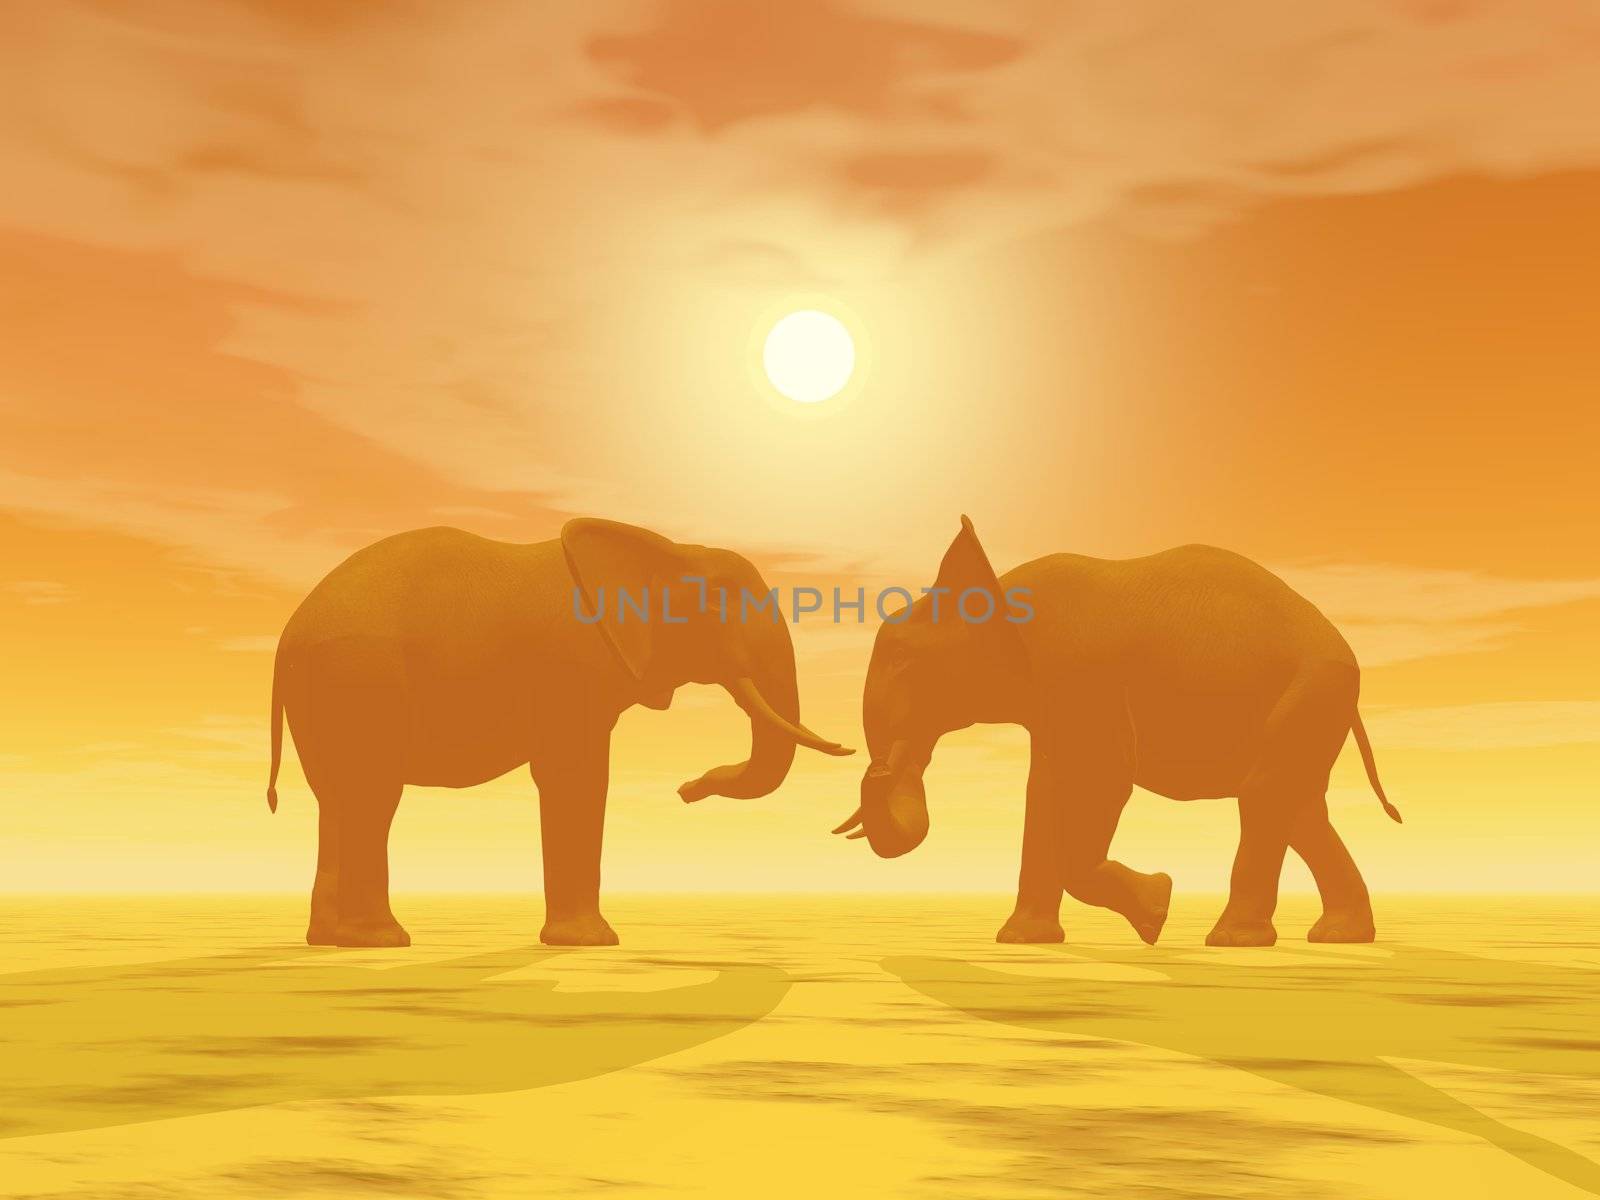 Two elephants face to face by hazy sunset in the desert